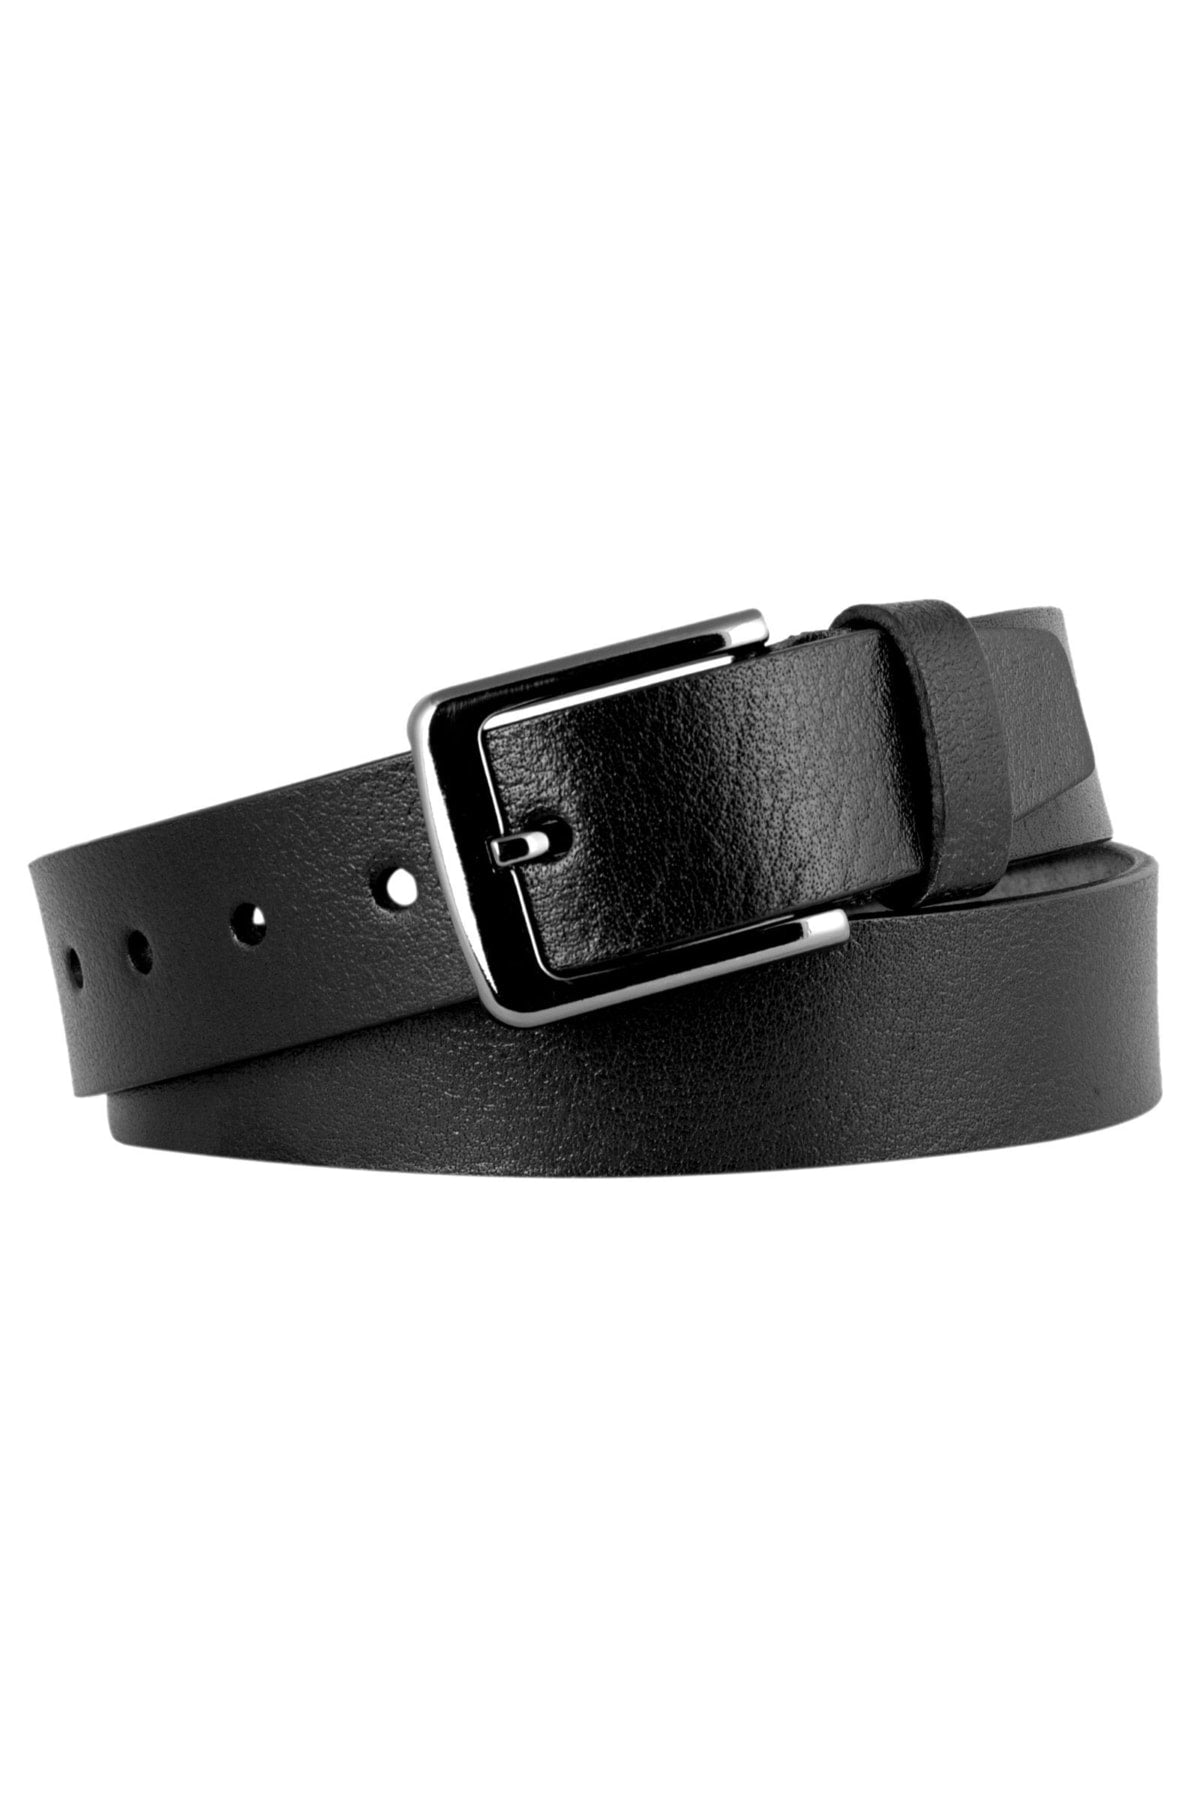 Genuine Mens Leather Belt 4 Cm For Jeans Canvas And Fabric Trousers